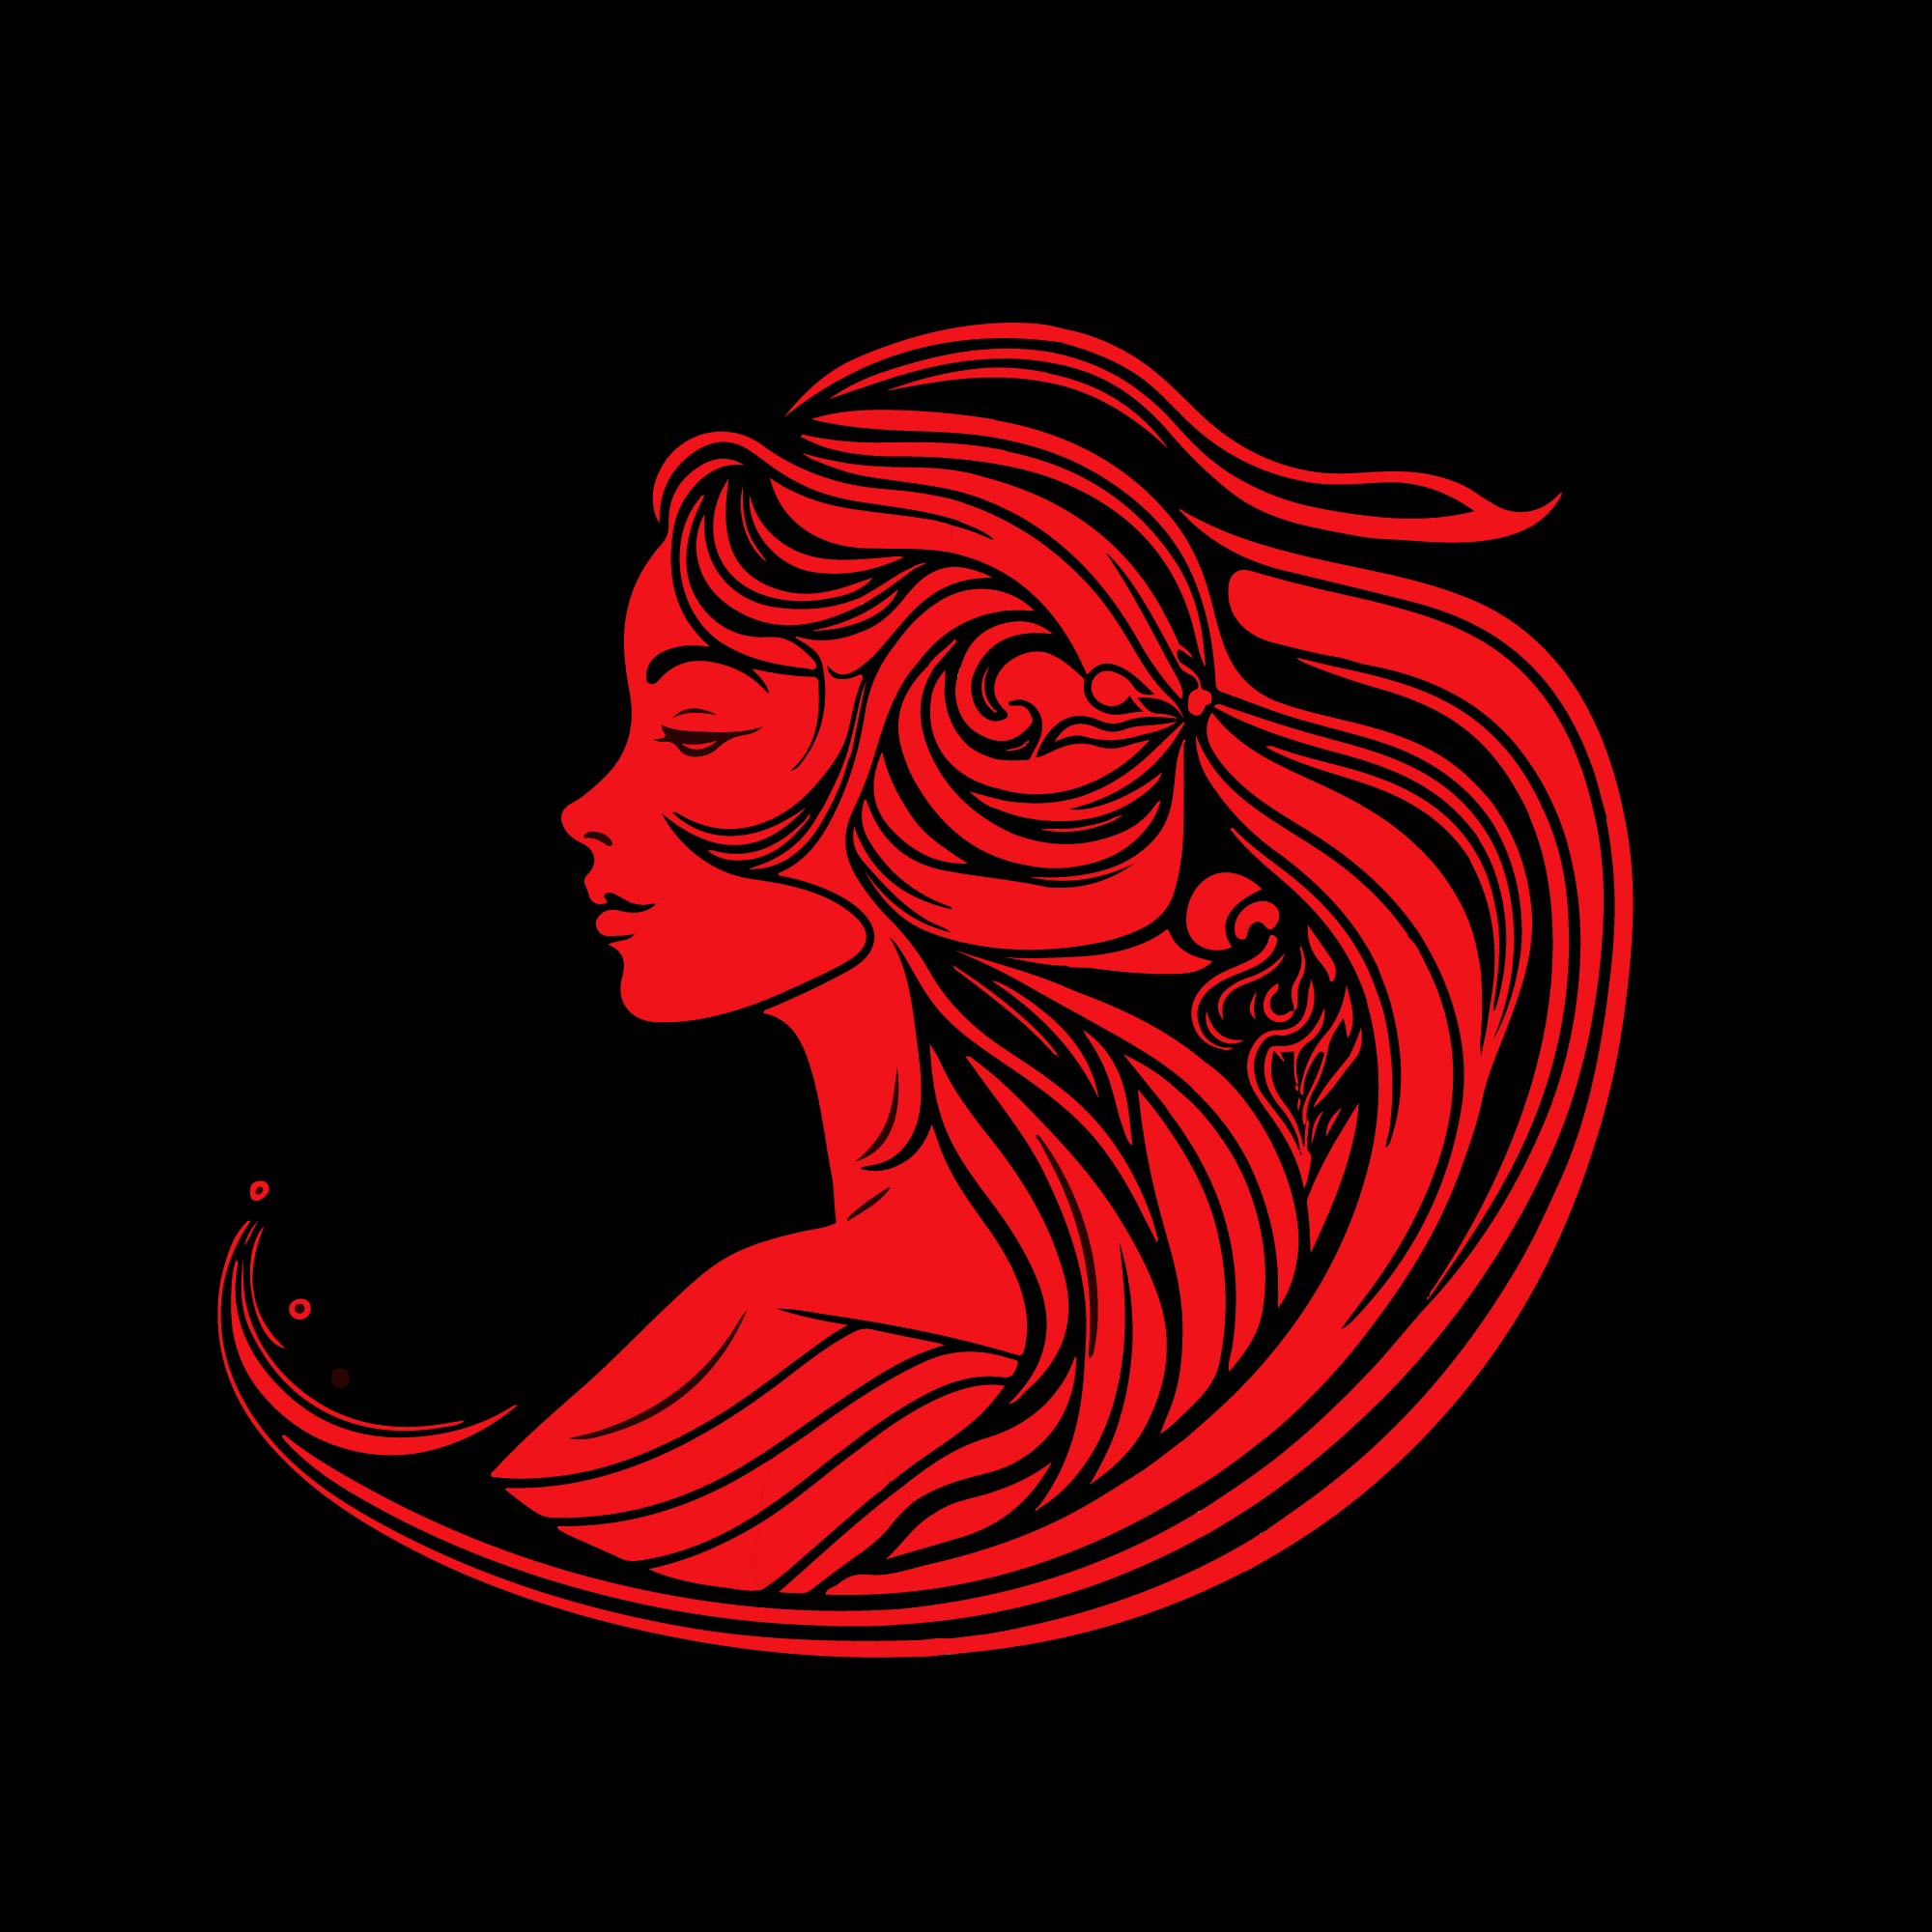 Beauty Girl Illustration with Black and Red color theme cover image.